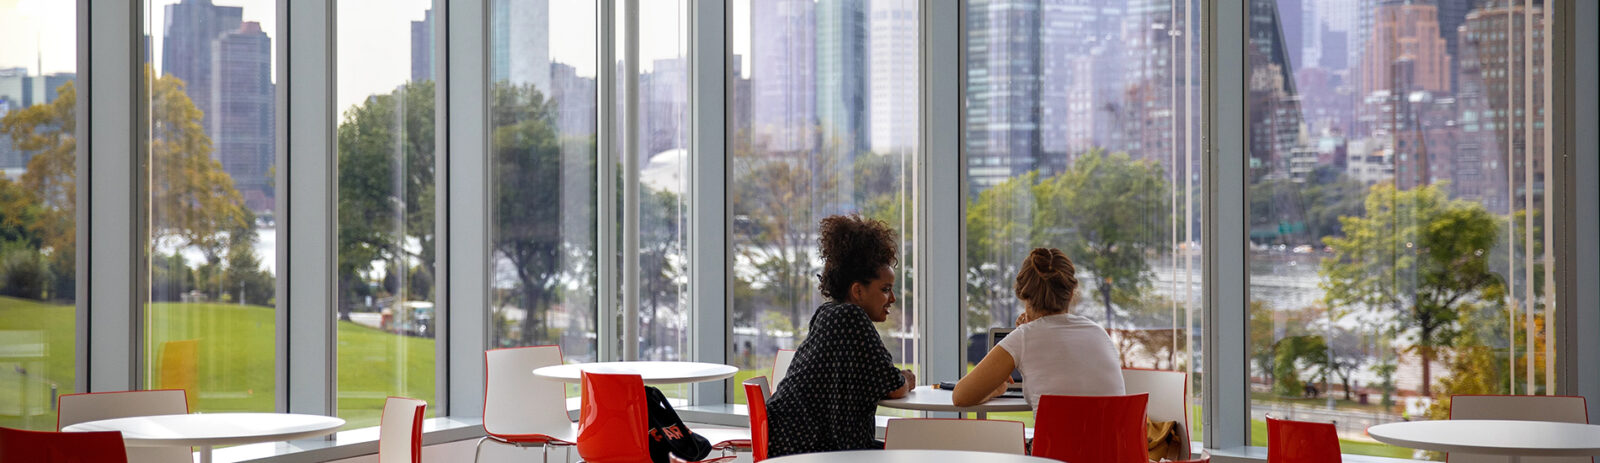 Two students sitting at a table with the city skyline seen through the window.